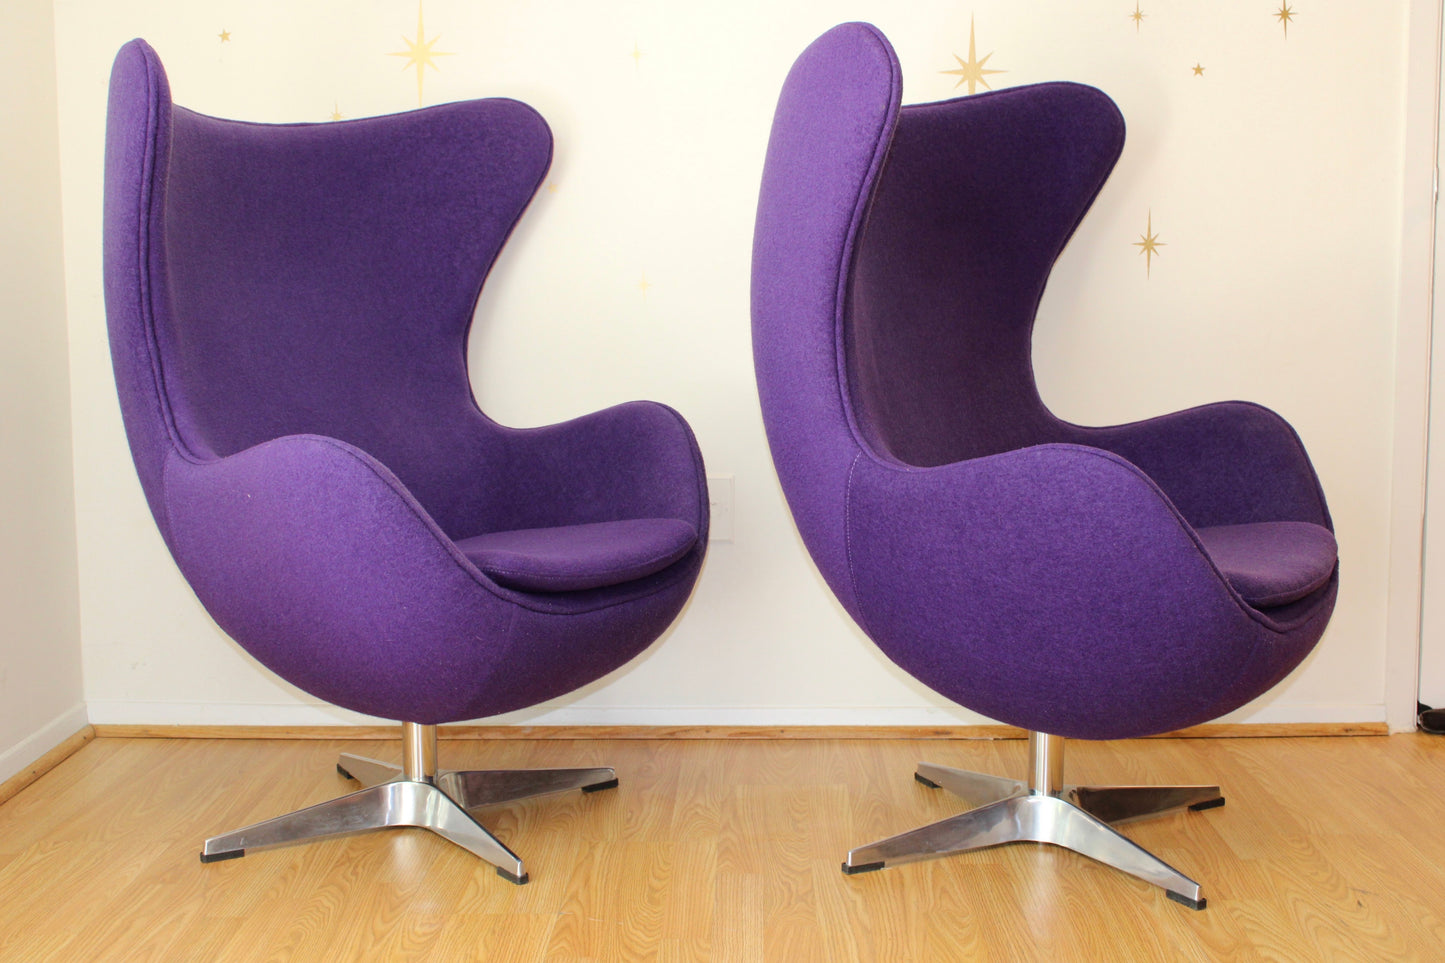 Pair-Contemporary Reproduction Egg Chairs